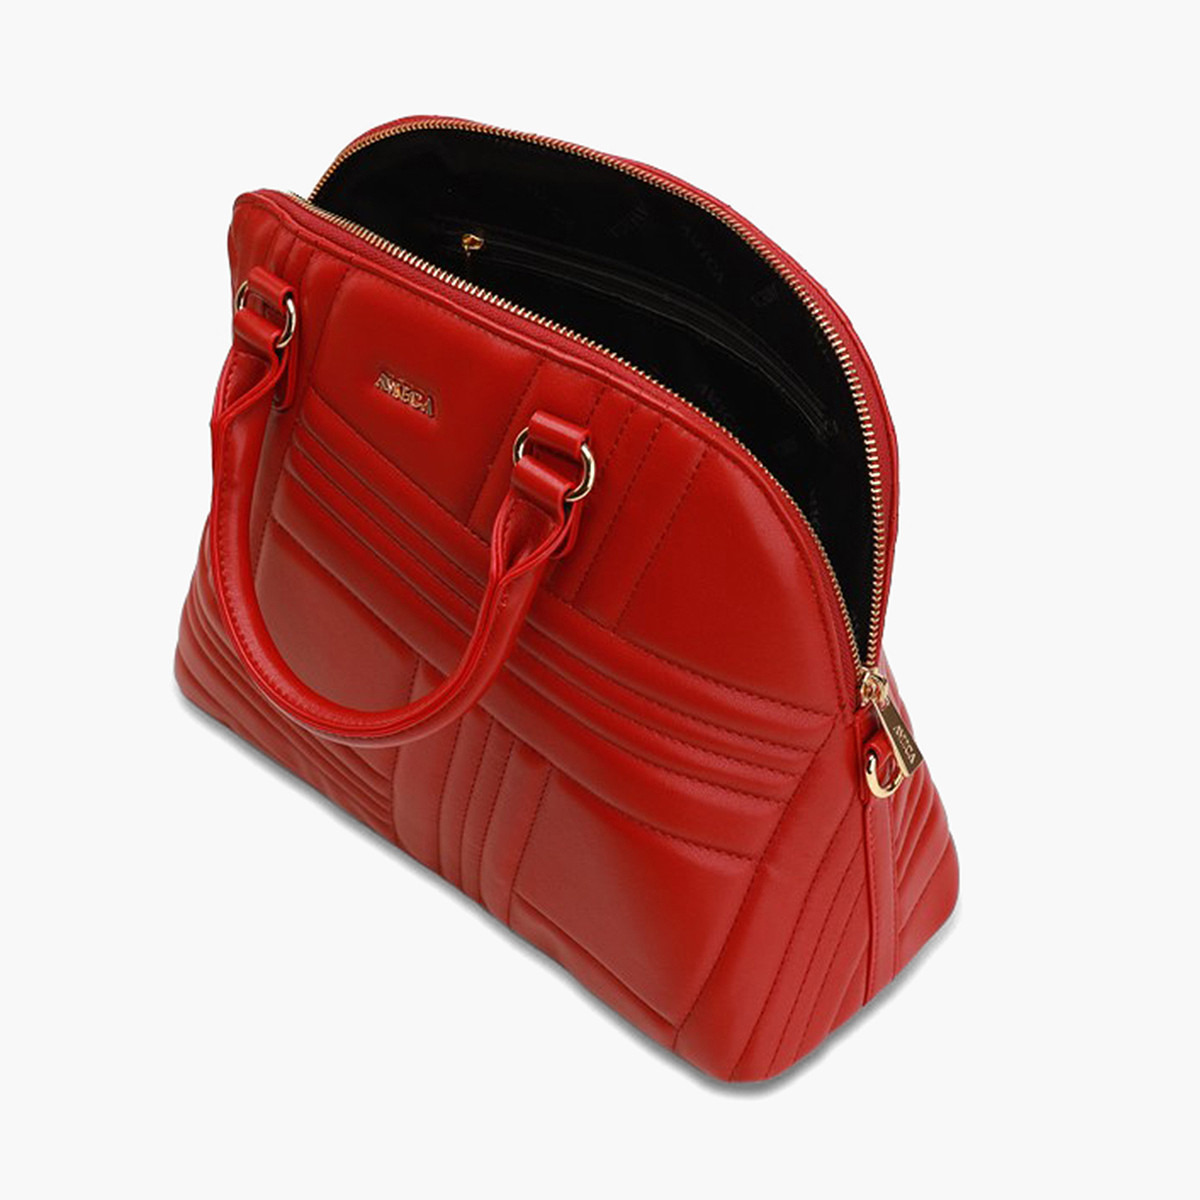 DKNY Chelsea Camera Bag, Bright RED : Amazon.in: Fashion